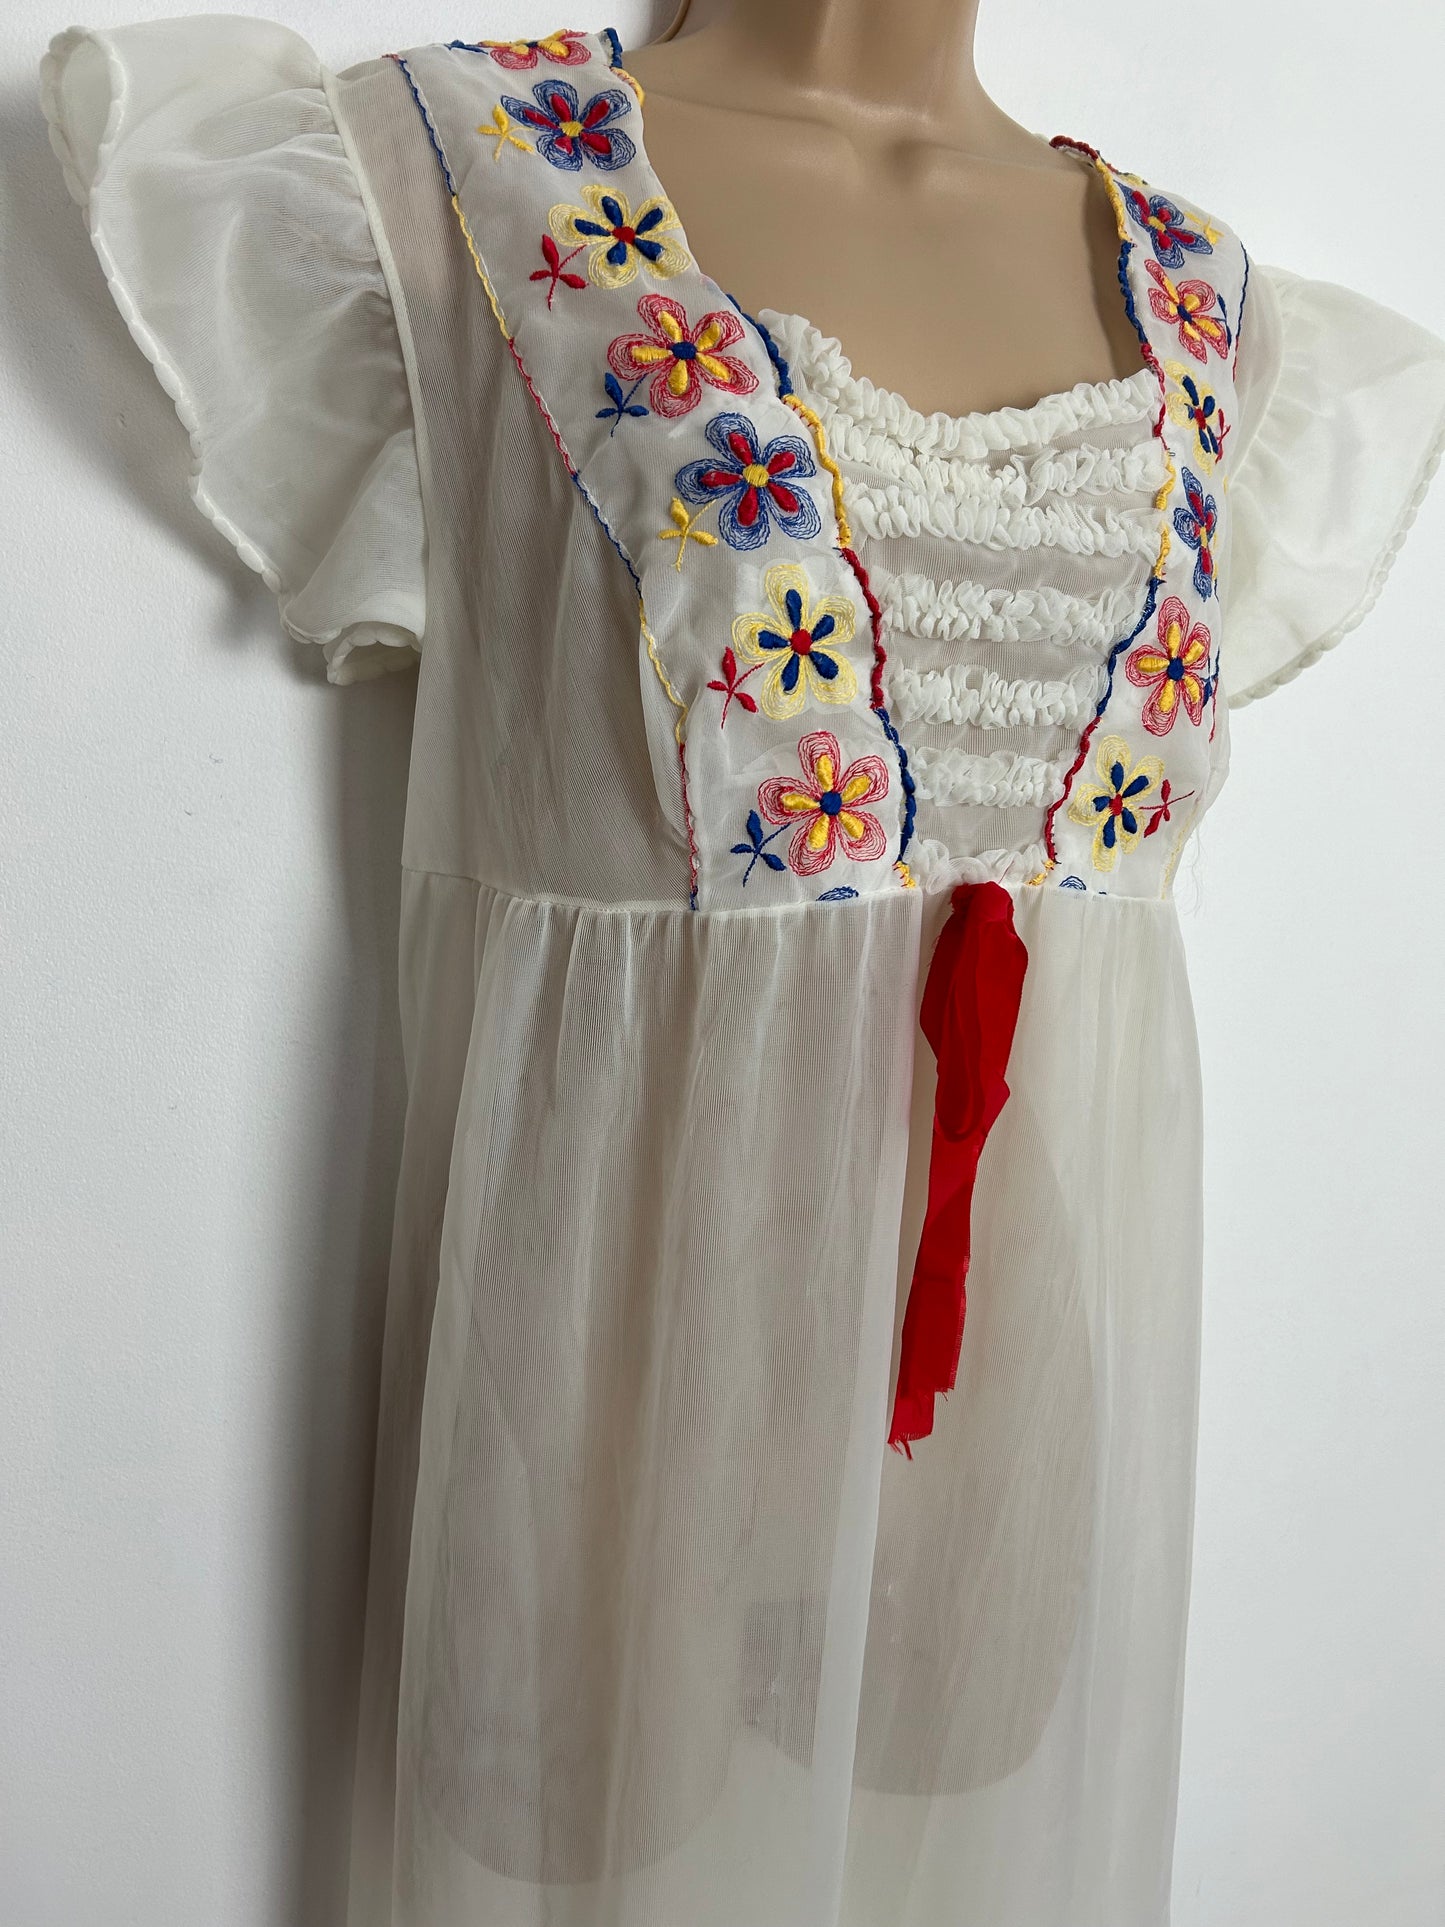 Vintage 1970s UK Size 16 Cute White Nylon Floral Embroidered Ruffle Pleated Trim Smock Style Nightie Nightdress